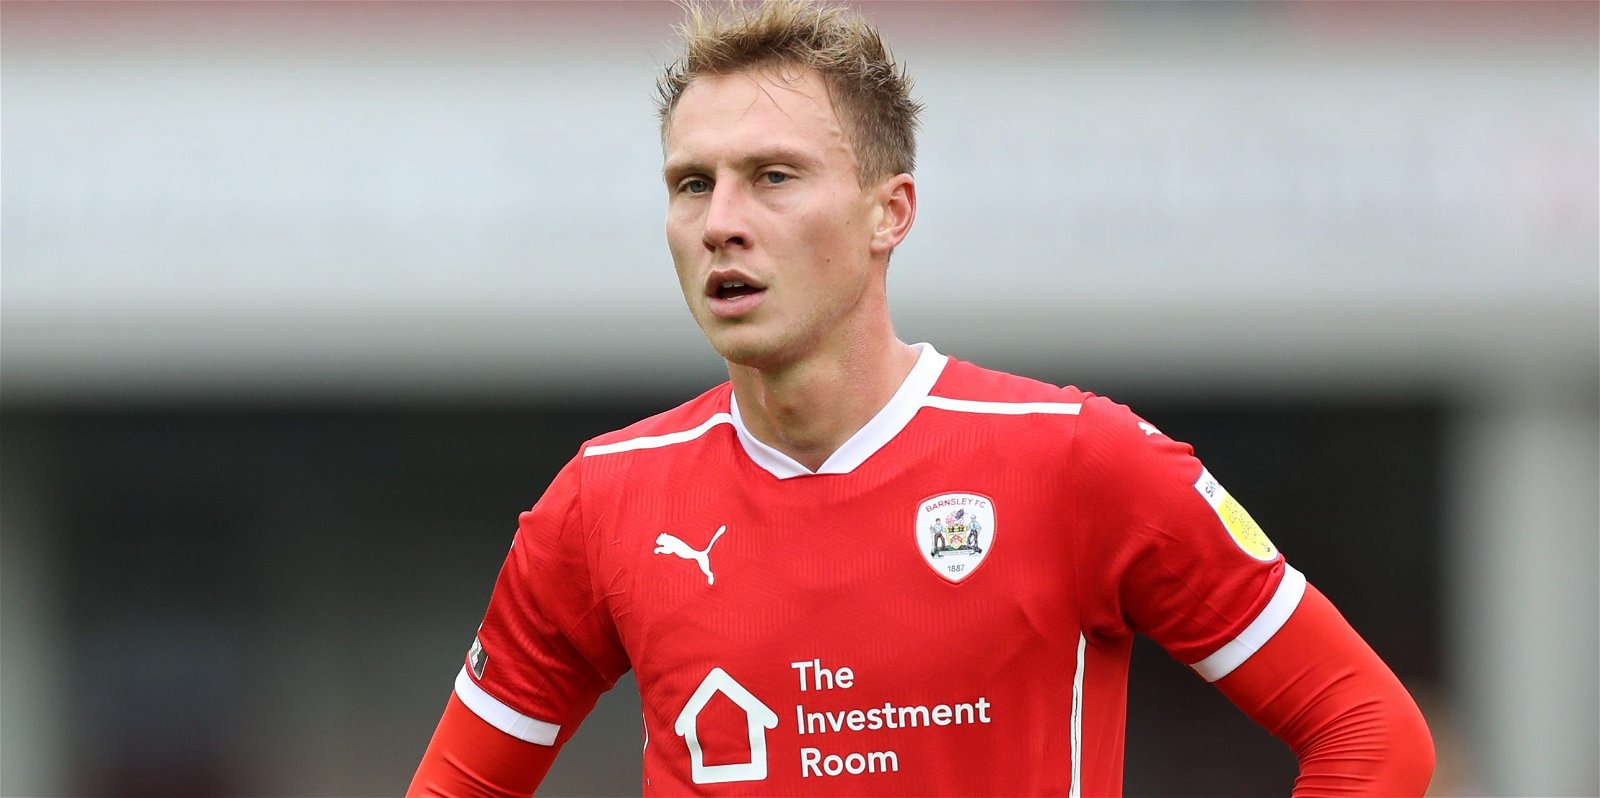 , Barnsley hotshot had interest from a &#8216;few clubs&#8217; as well as Cardiff City